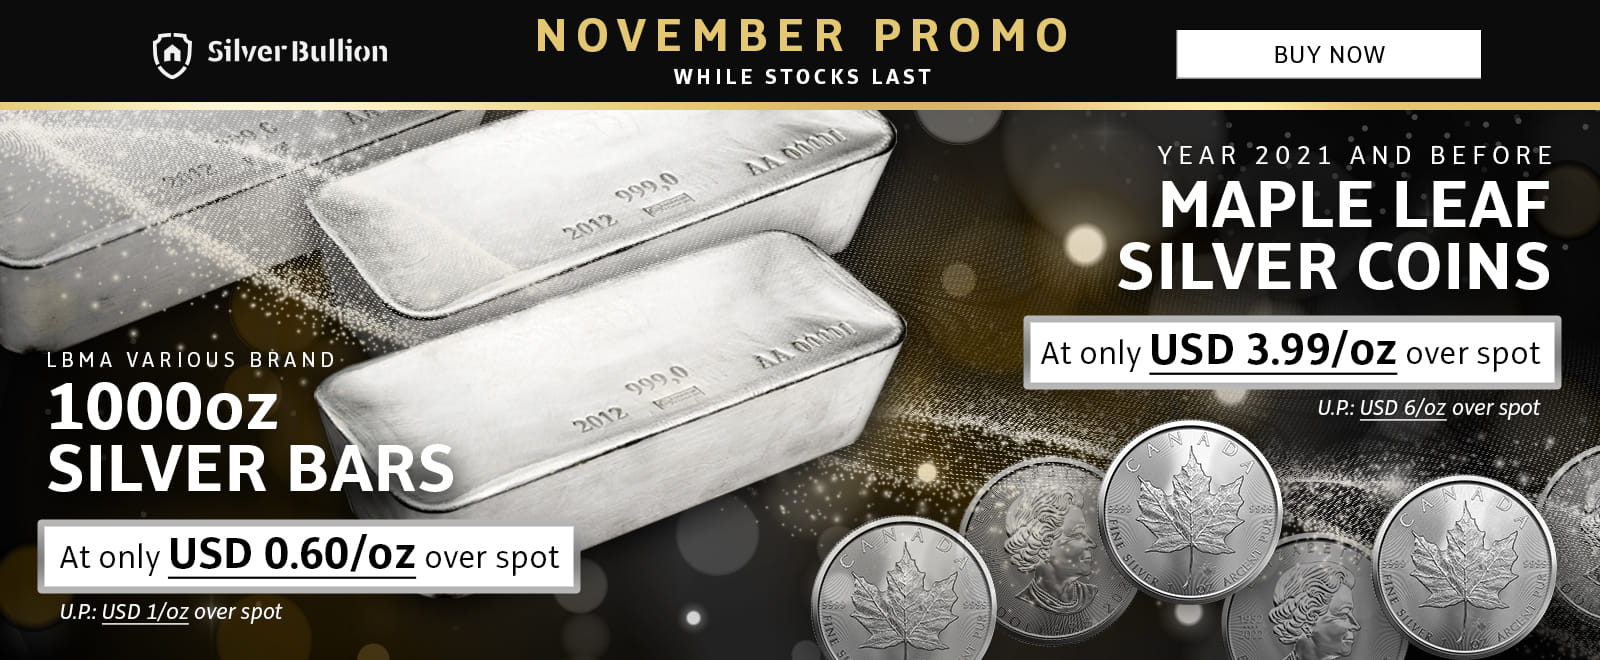 November 2023 Promo - LBMA various brands 1000 oz Silver Bars at only 0.60 USD / oz over spot & 1 oz Silver Maple Leaf Coins (Year 2021 and before) at only 3.99 USD / oz over spot